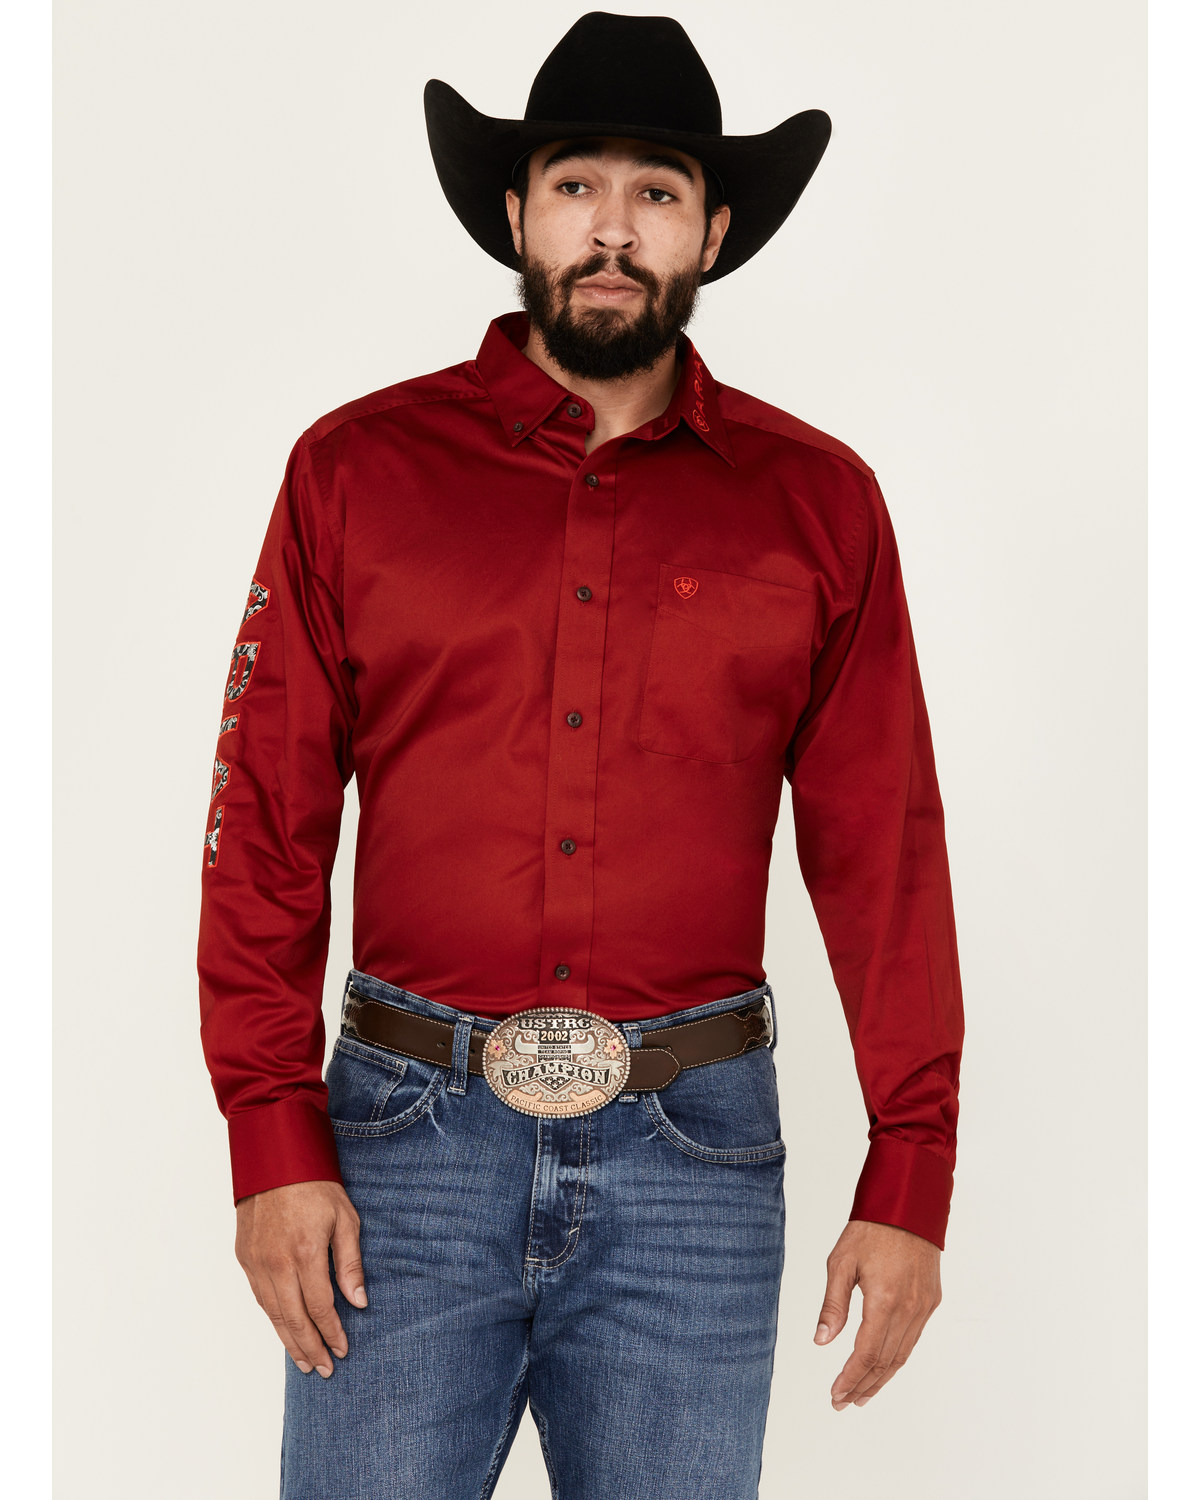 Ariat Men's Team Logo Twill Fitted Long Sleeve Button-Down Western Shirt